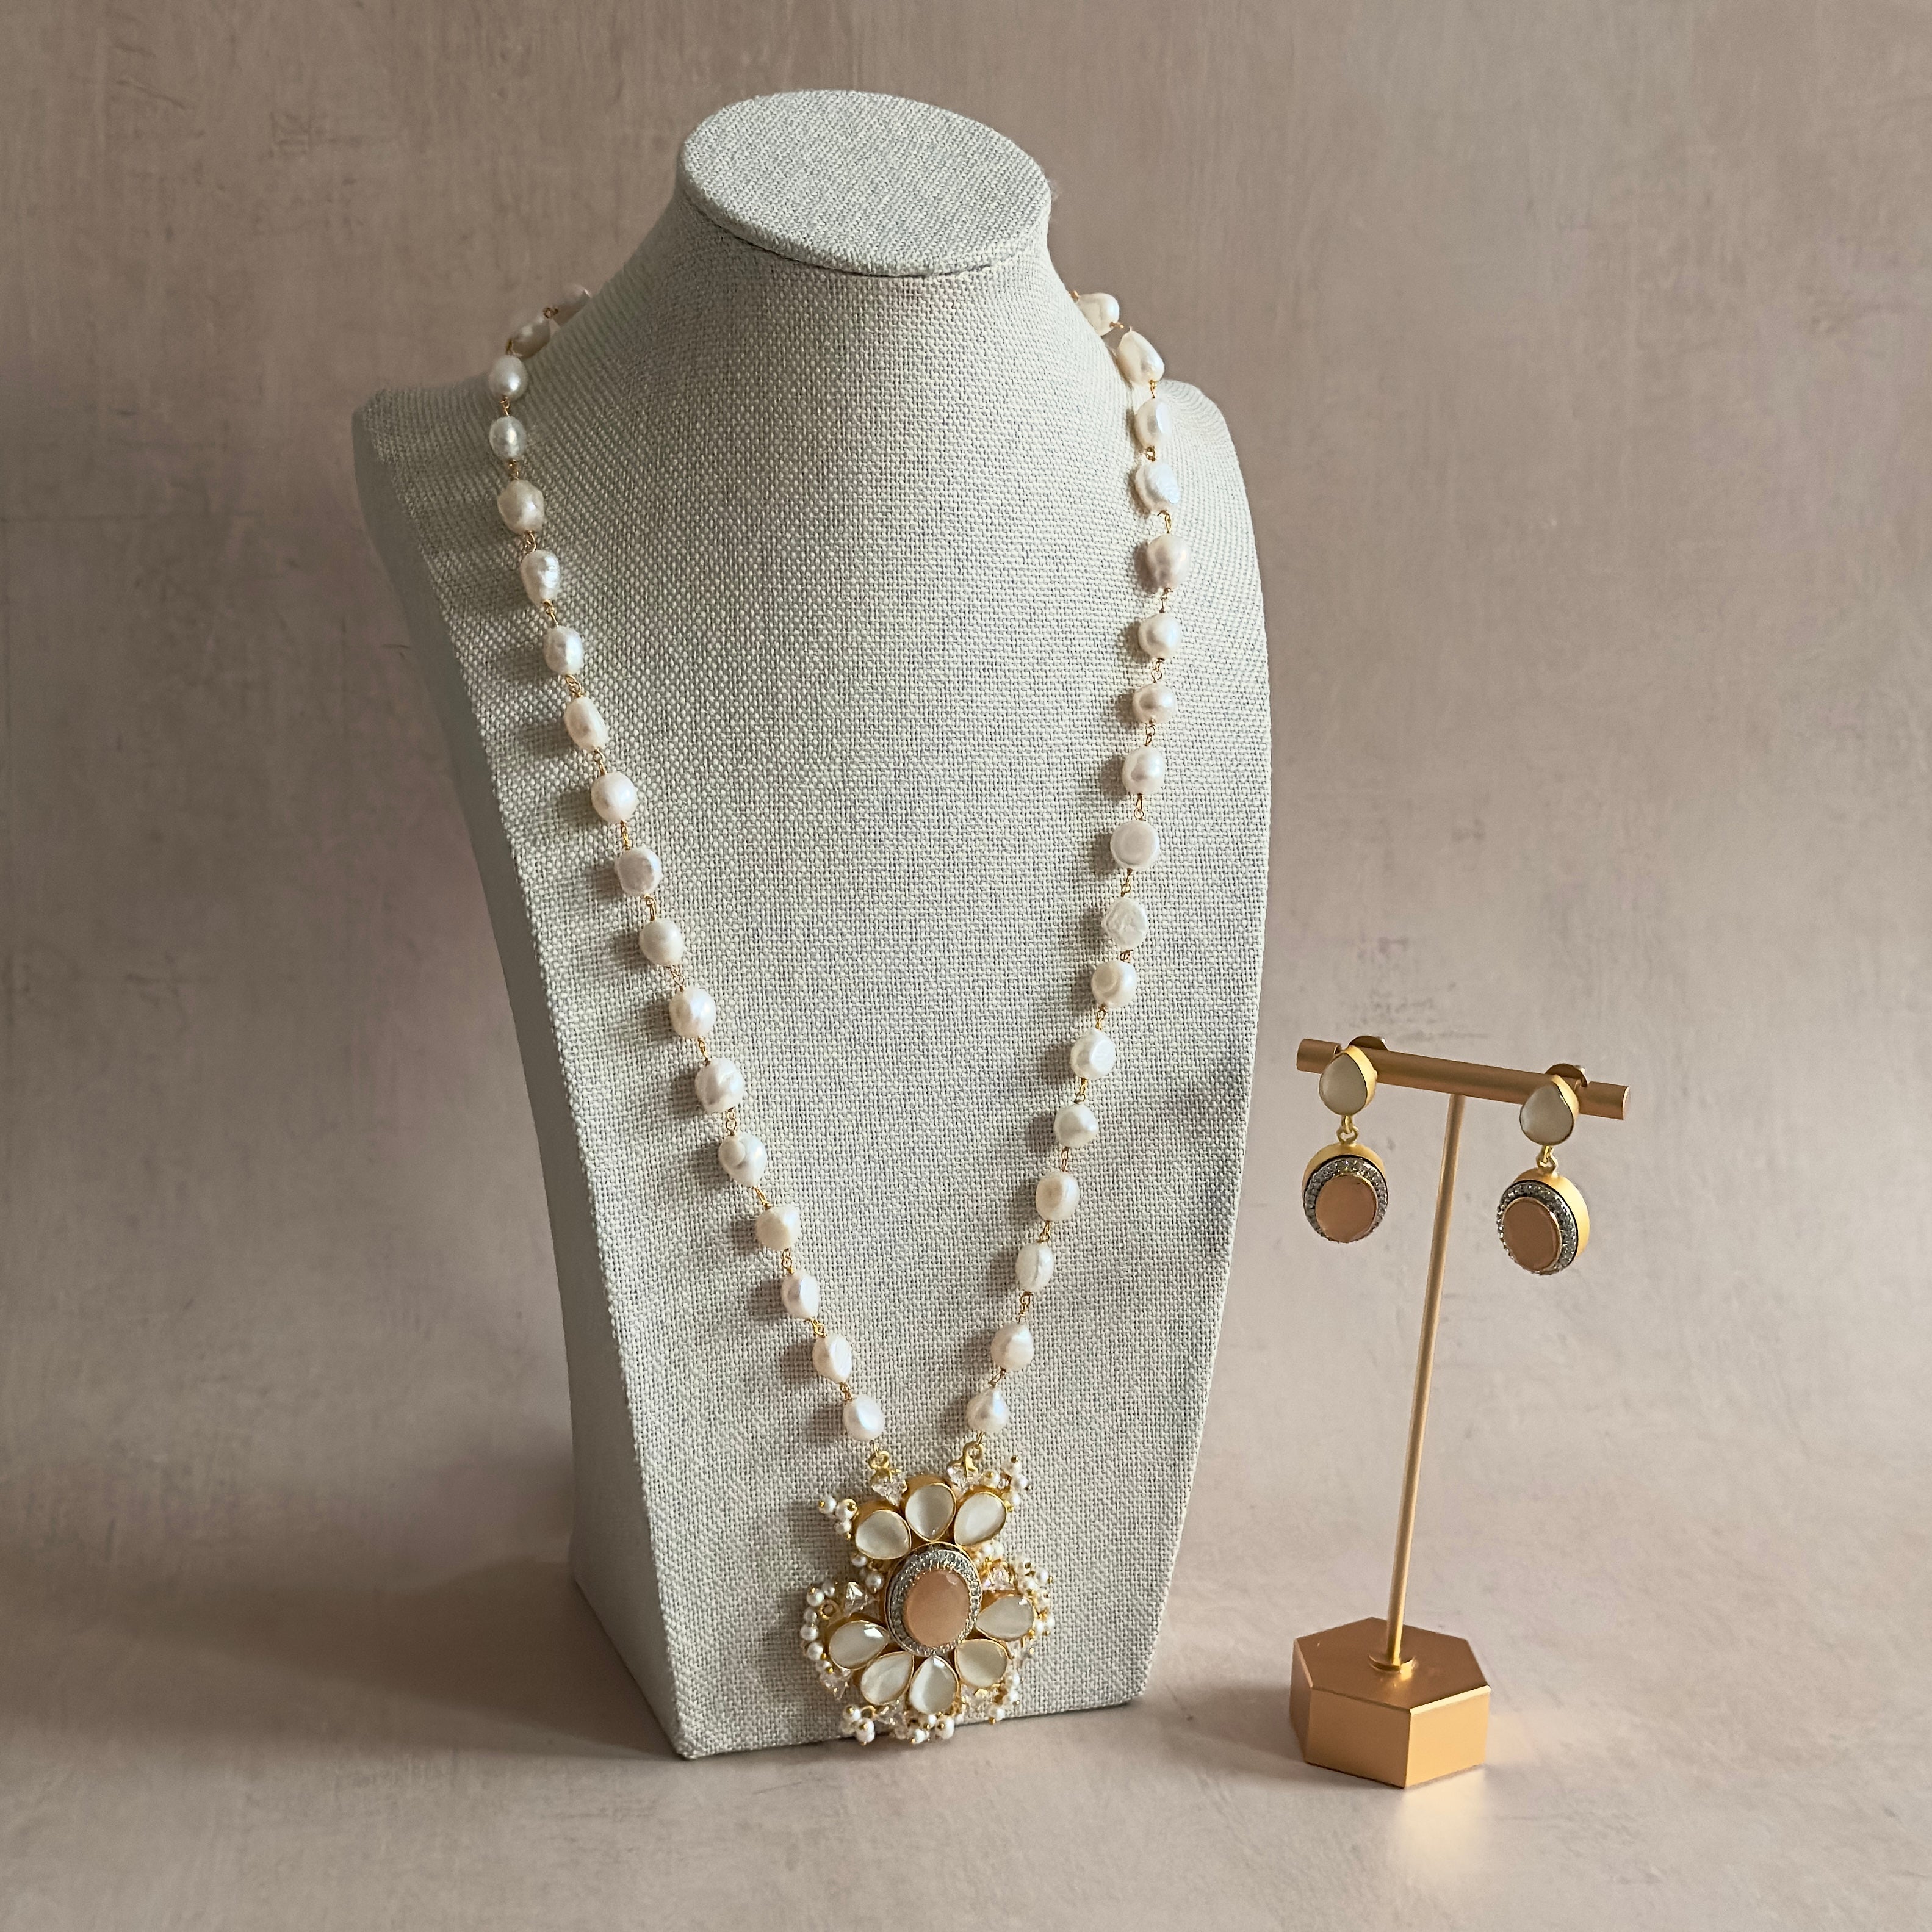 Elevate your look with our Jasmeen Grey Peach Mala Set! This stunning set features a long necklace design adorned with beautiful pearls with hues of peach and grey. Complete with the matching earrings for a sophisticated touch. Perfect for any occasion.